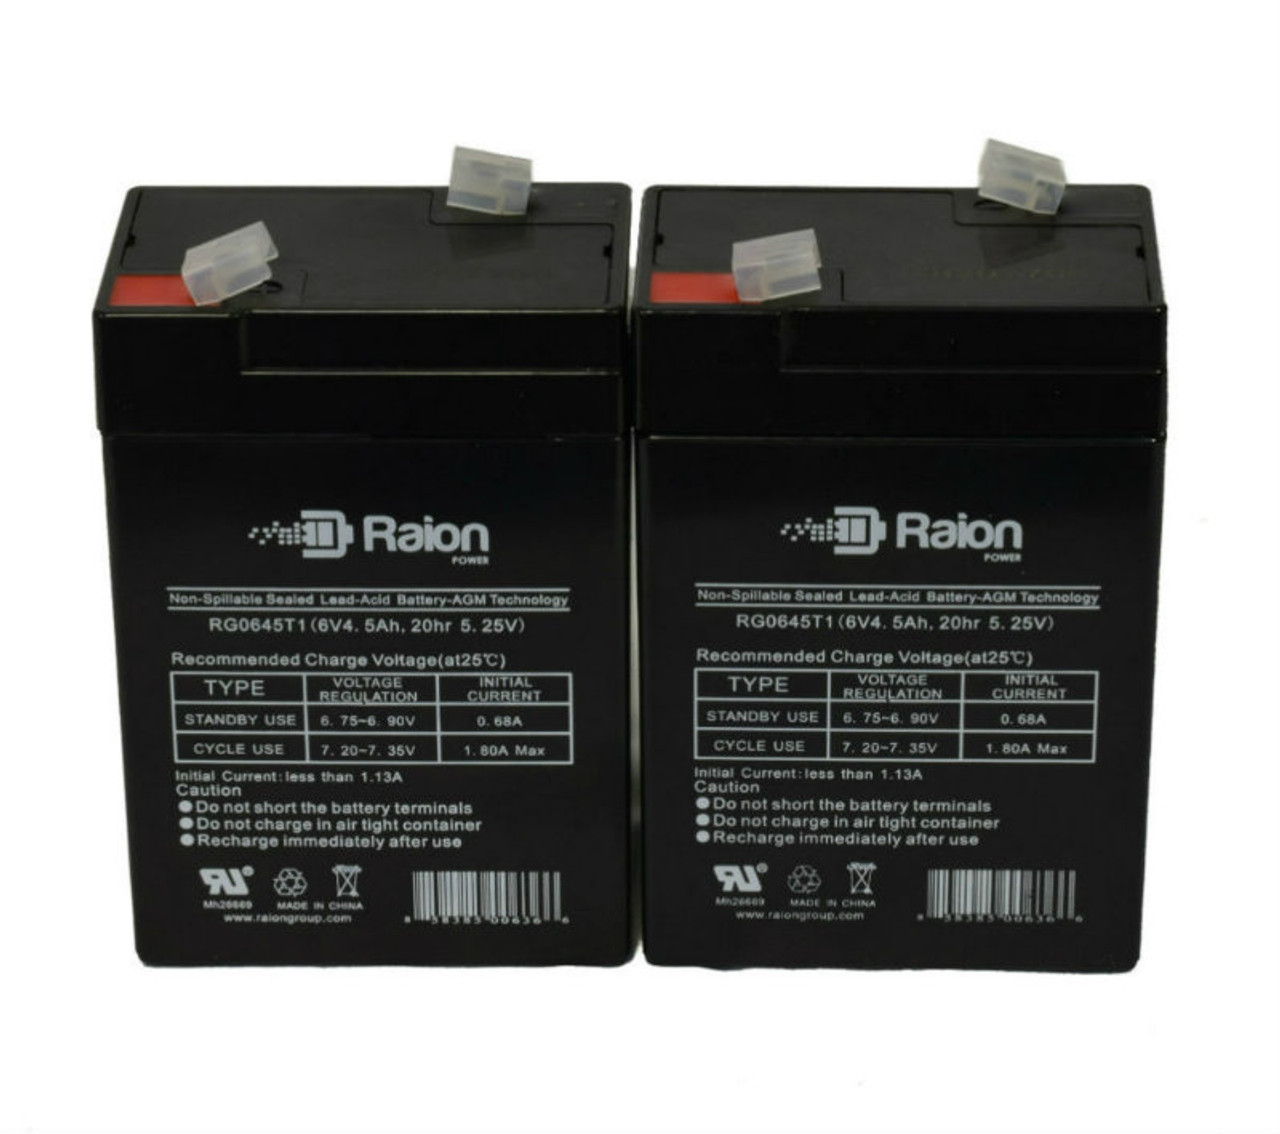 Raion Power 6 Volt 4.5Ah RG0645T1 Replacement Battery for Himalaya 3FM2.5 - 2 Pack